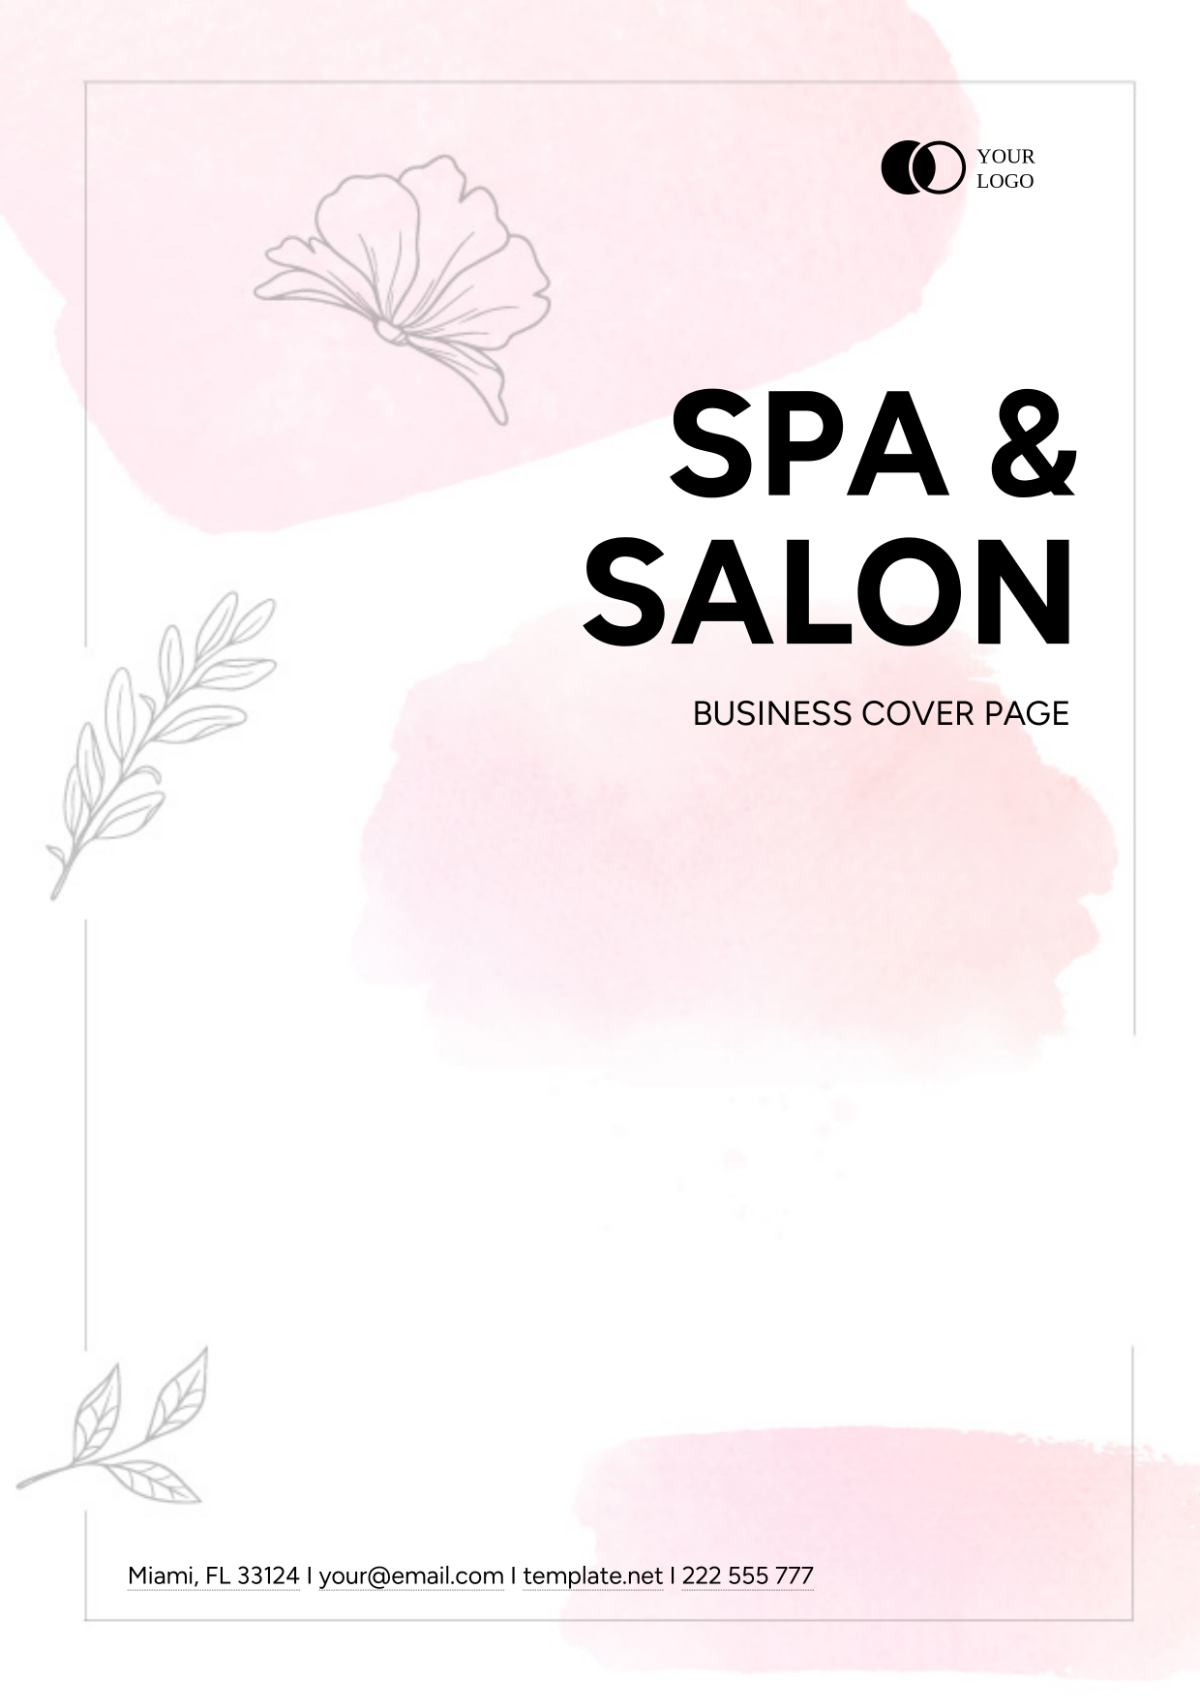 Salon & Spa Business Cover Page